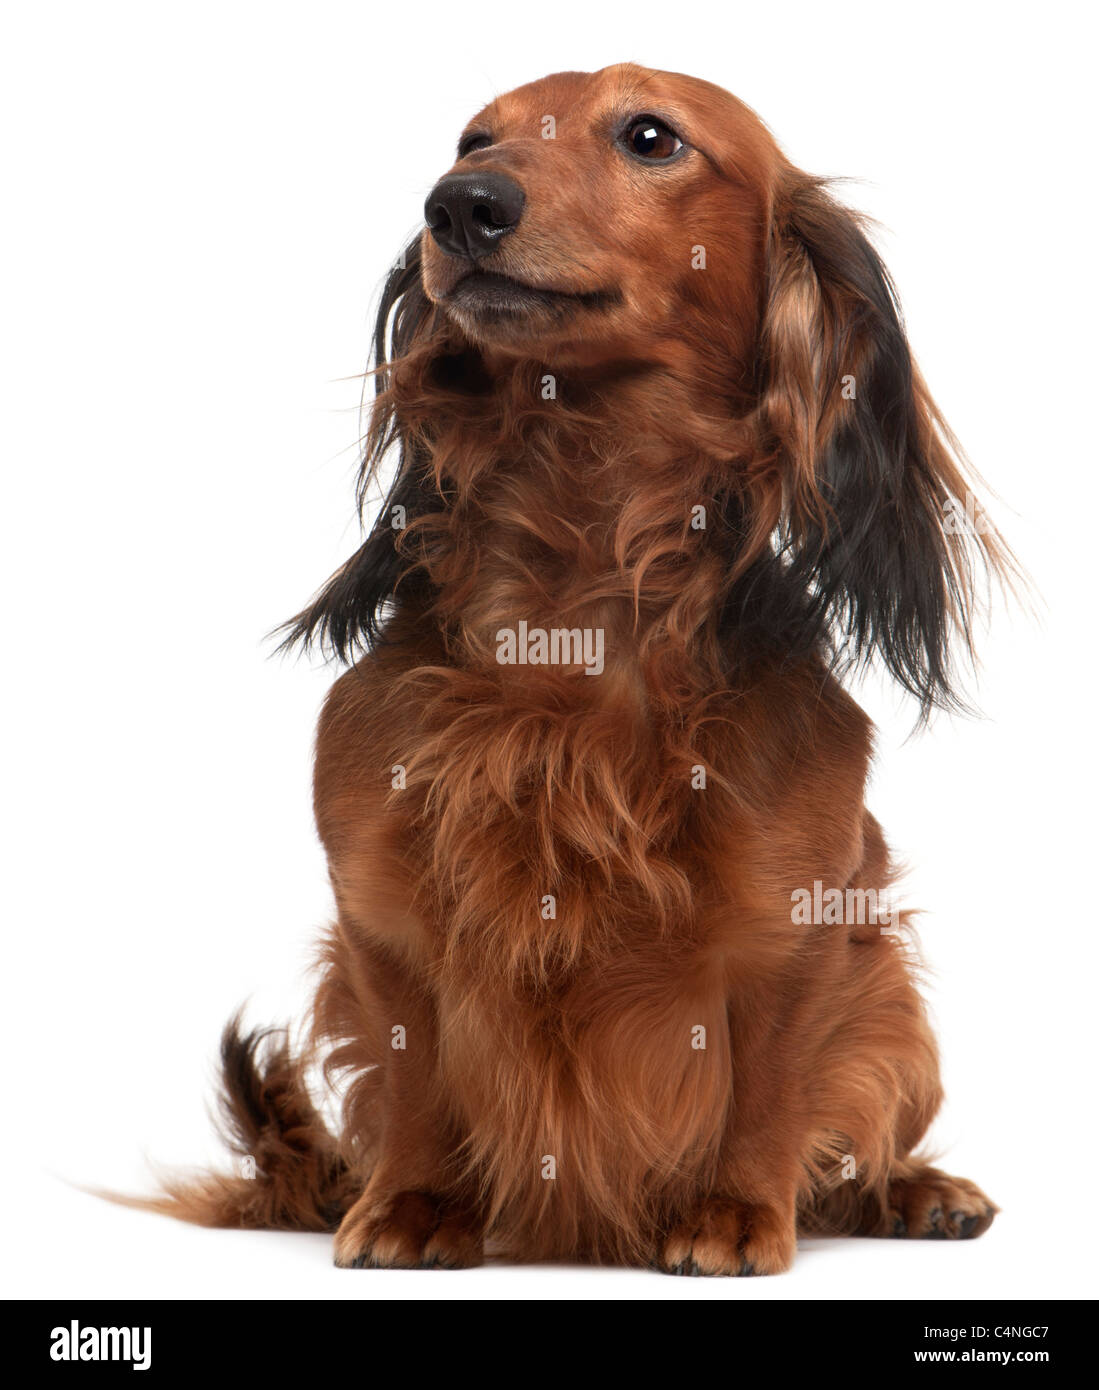 Dachshund, 3 years old, sitting in front of white background Stock Photo